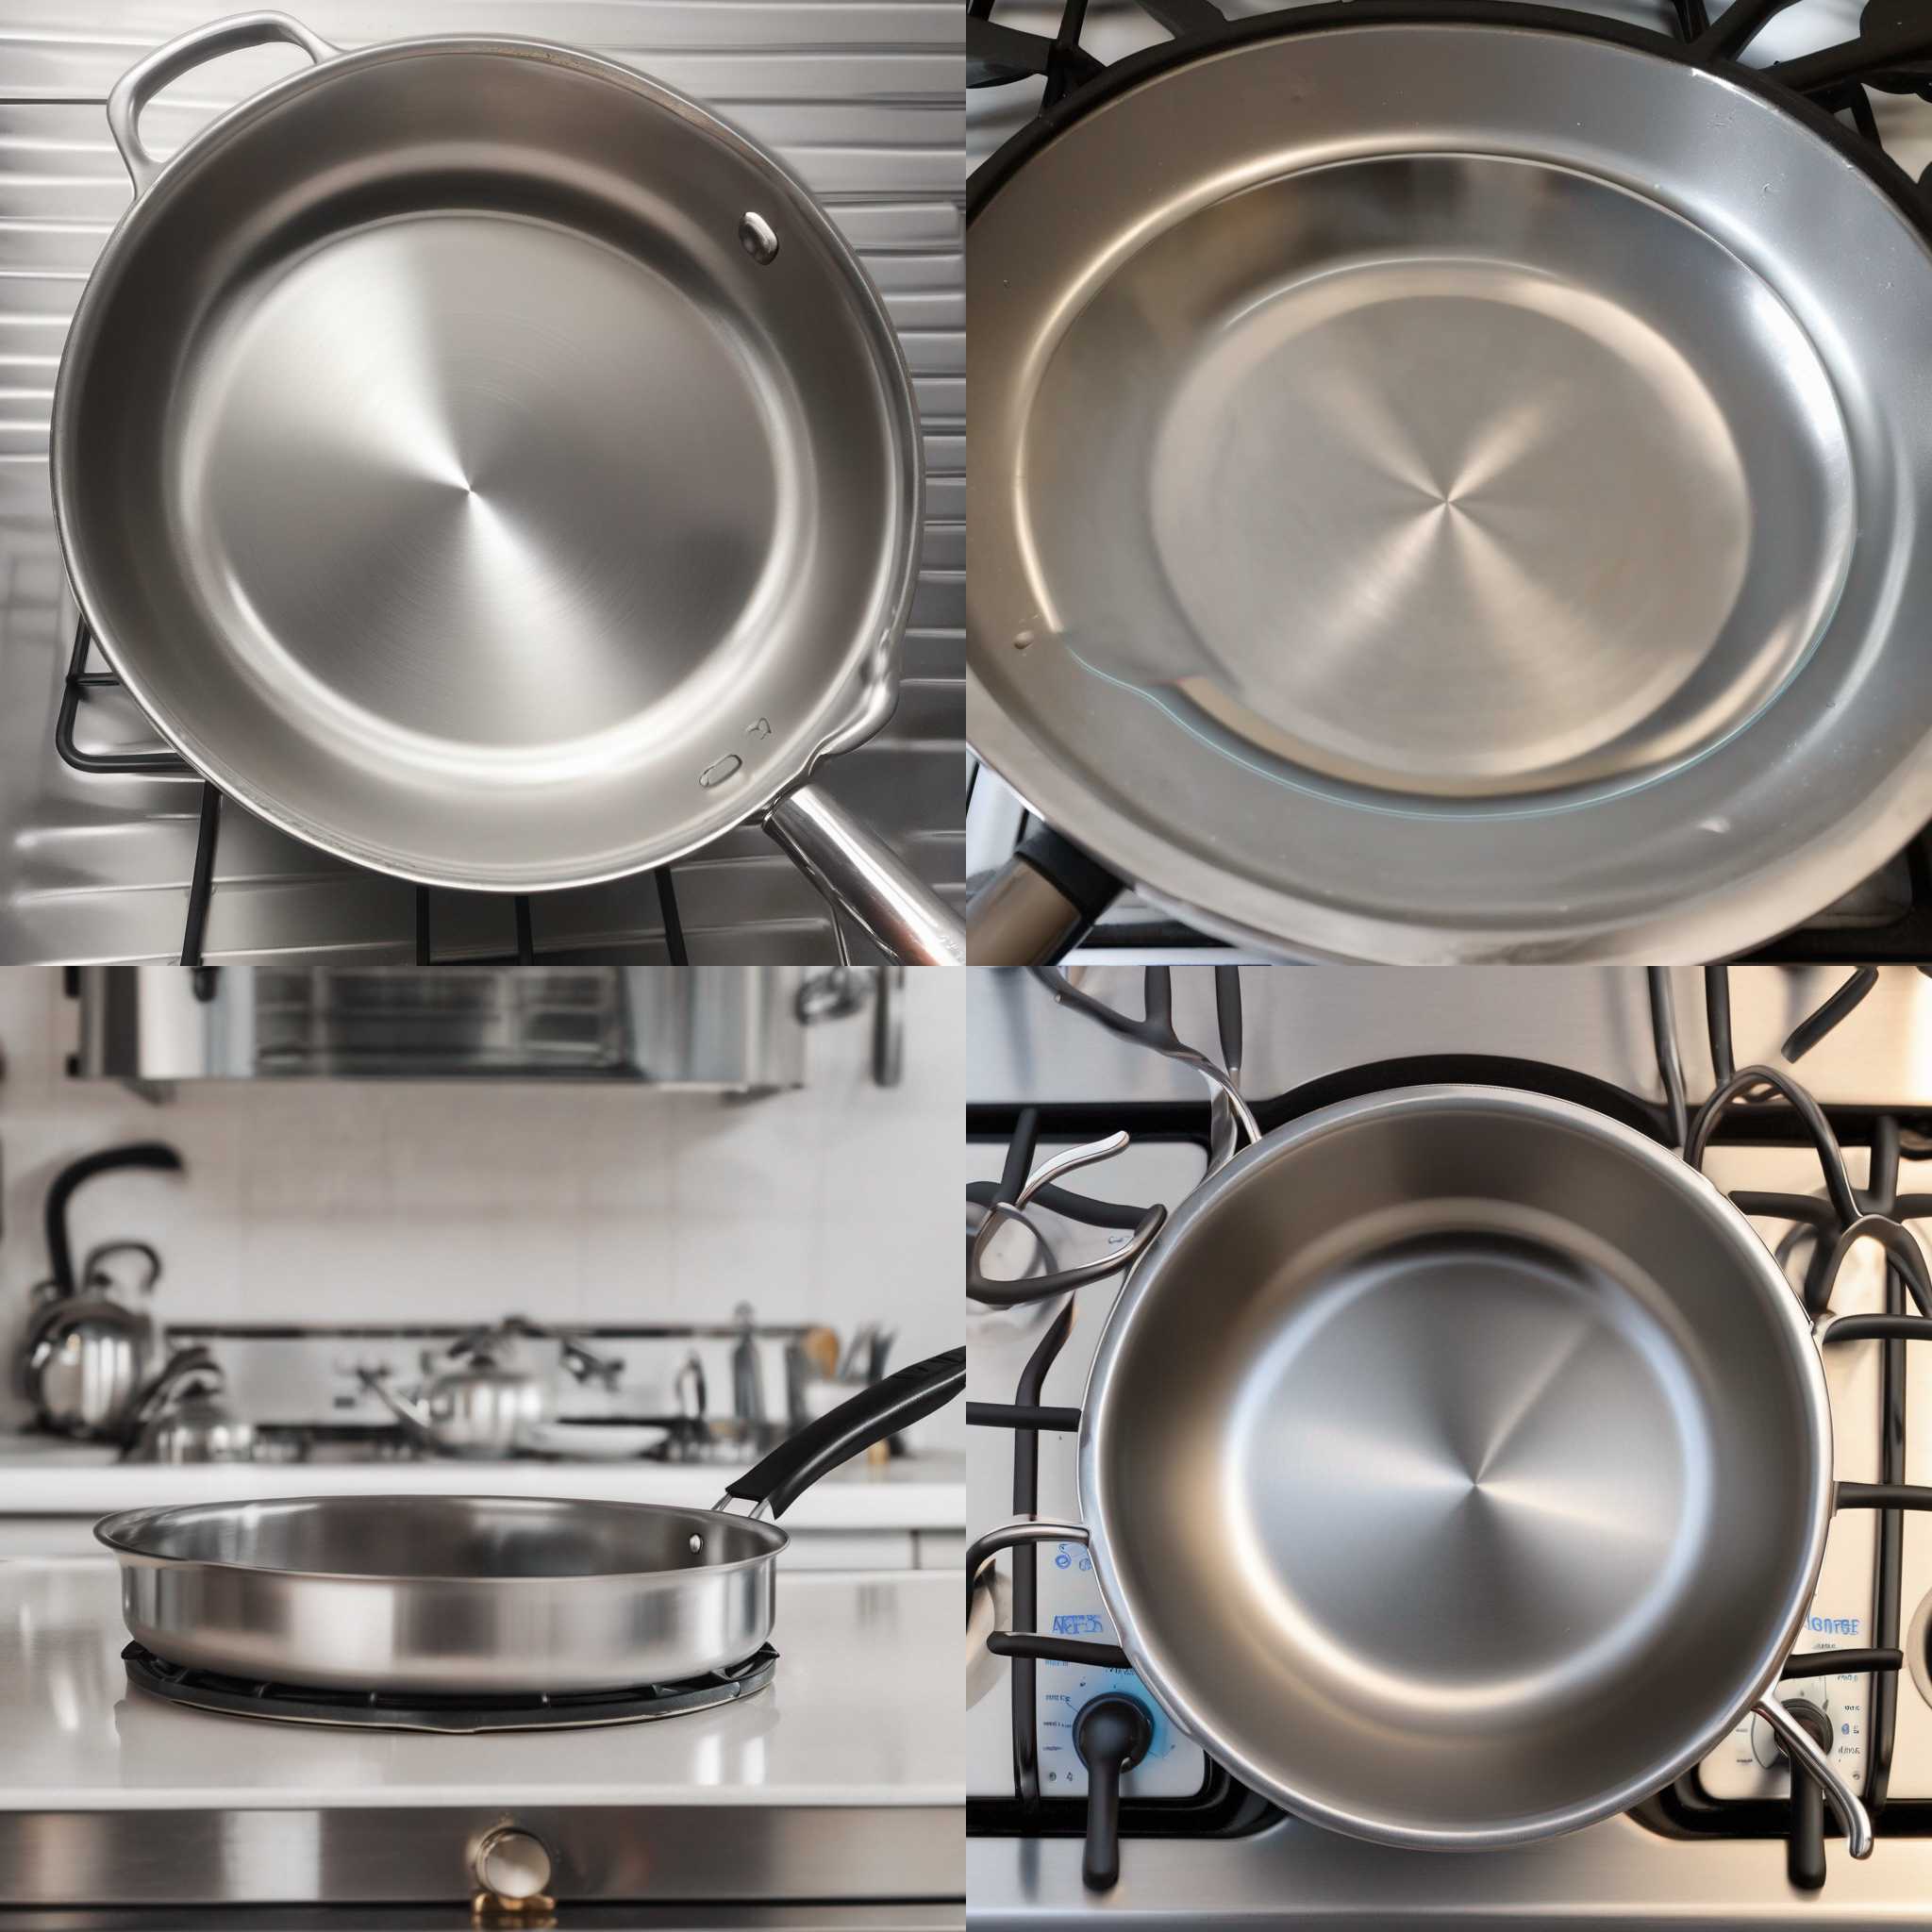 A stainless steel pan heated properly